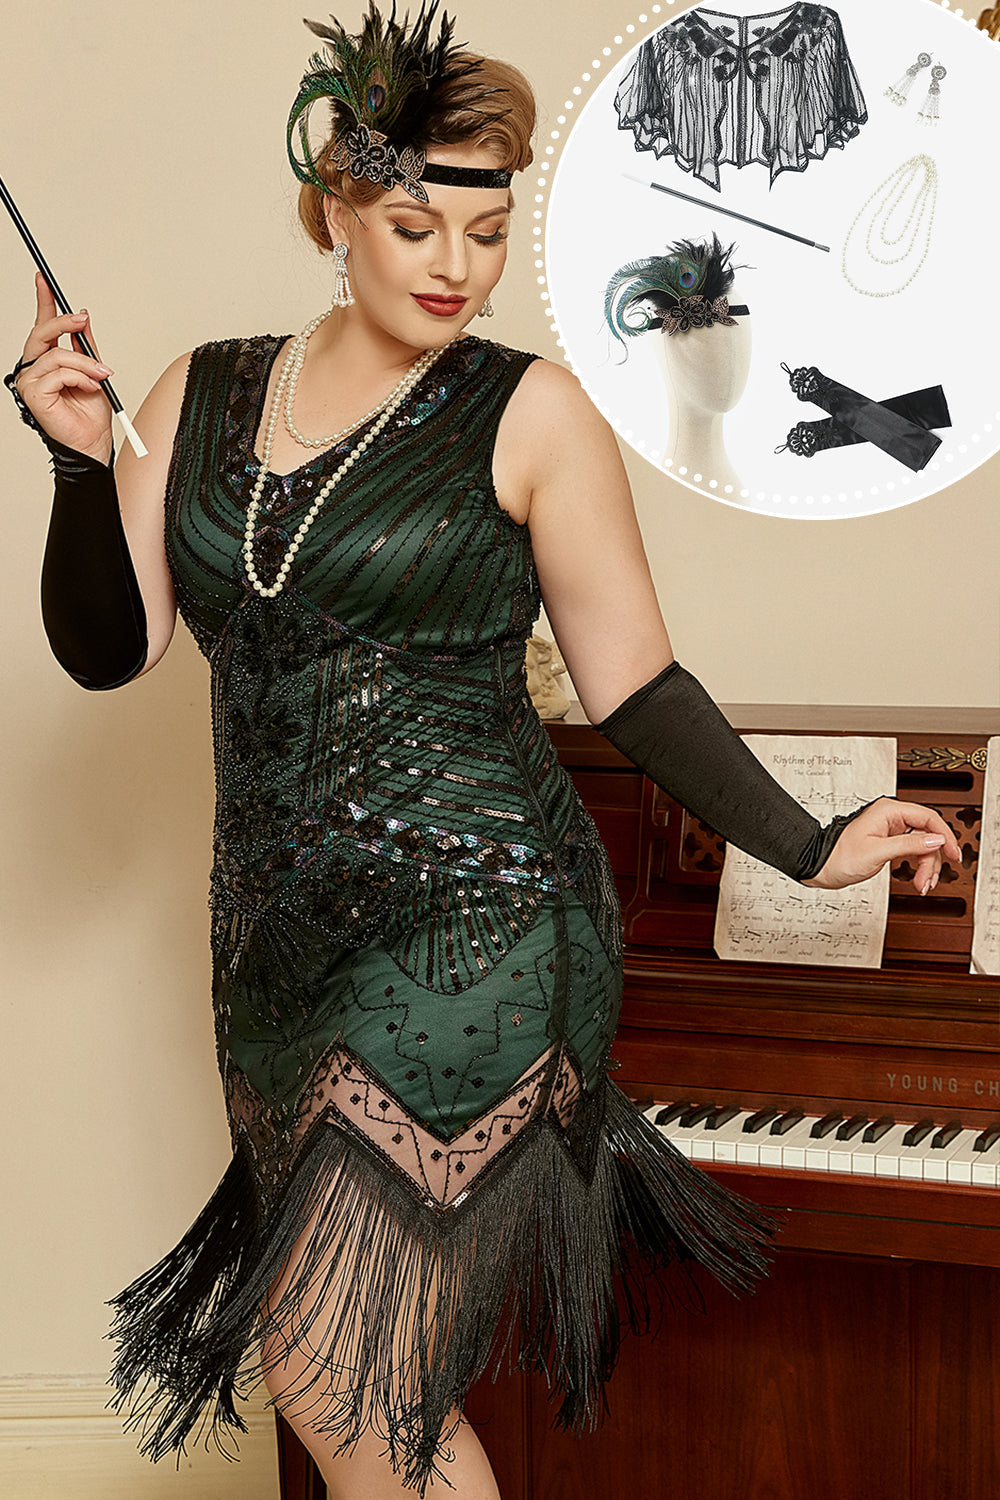 Dark Green Sequined 1920s Plus Size Flapper Dress with 20s Accessories Set